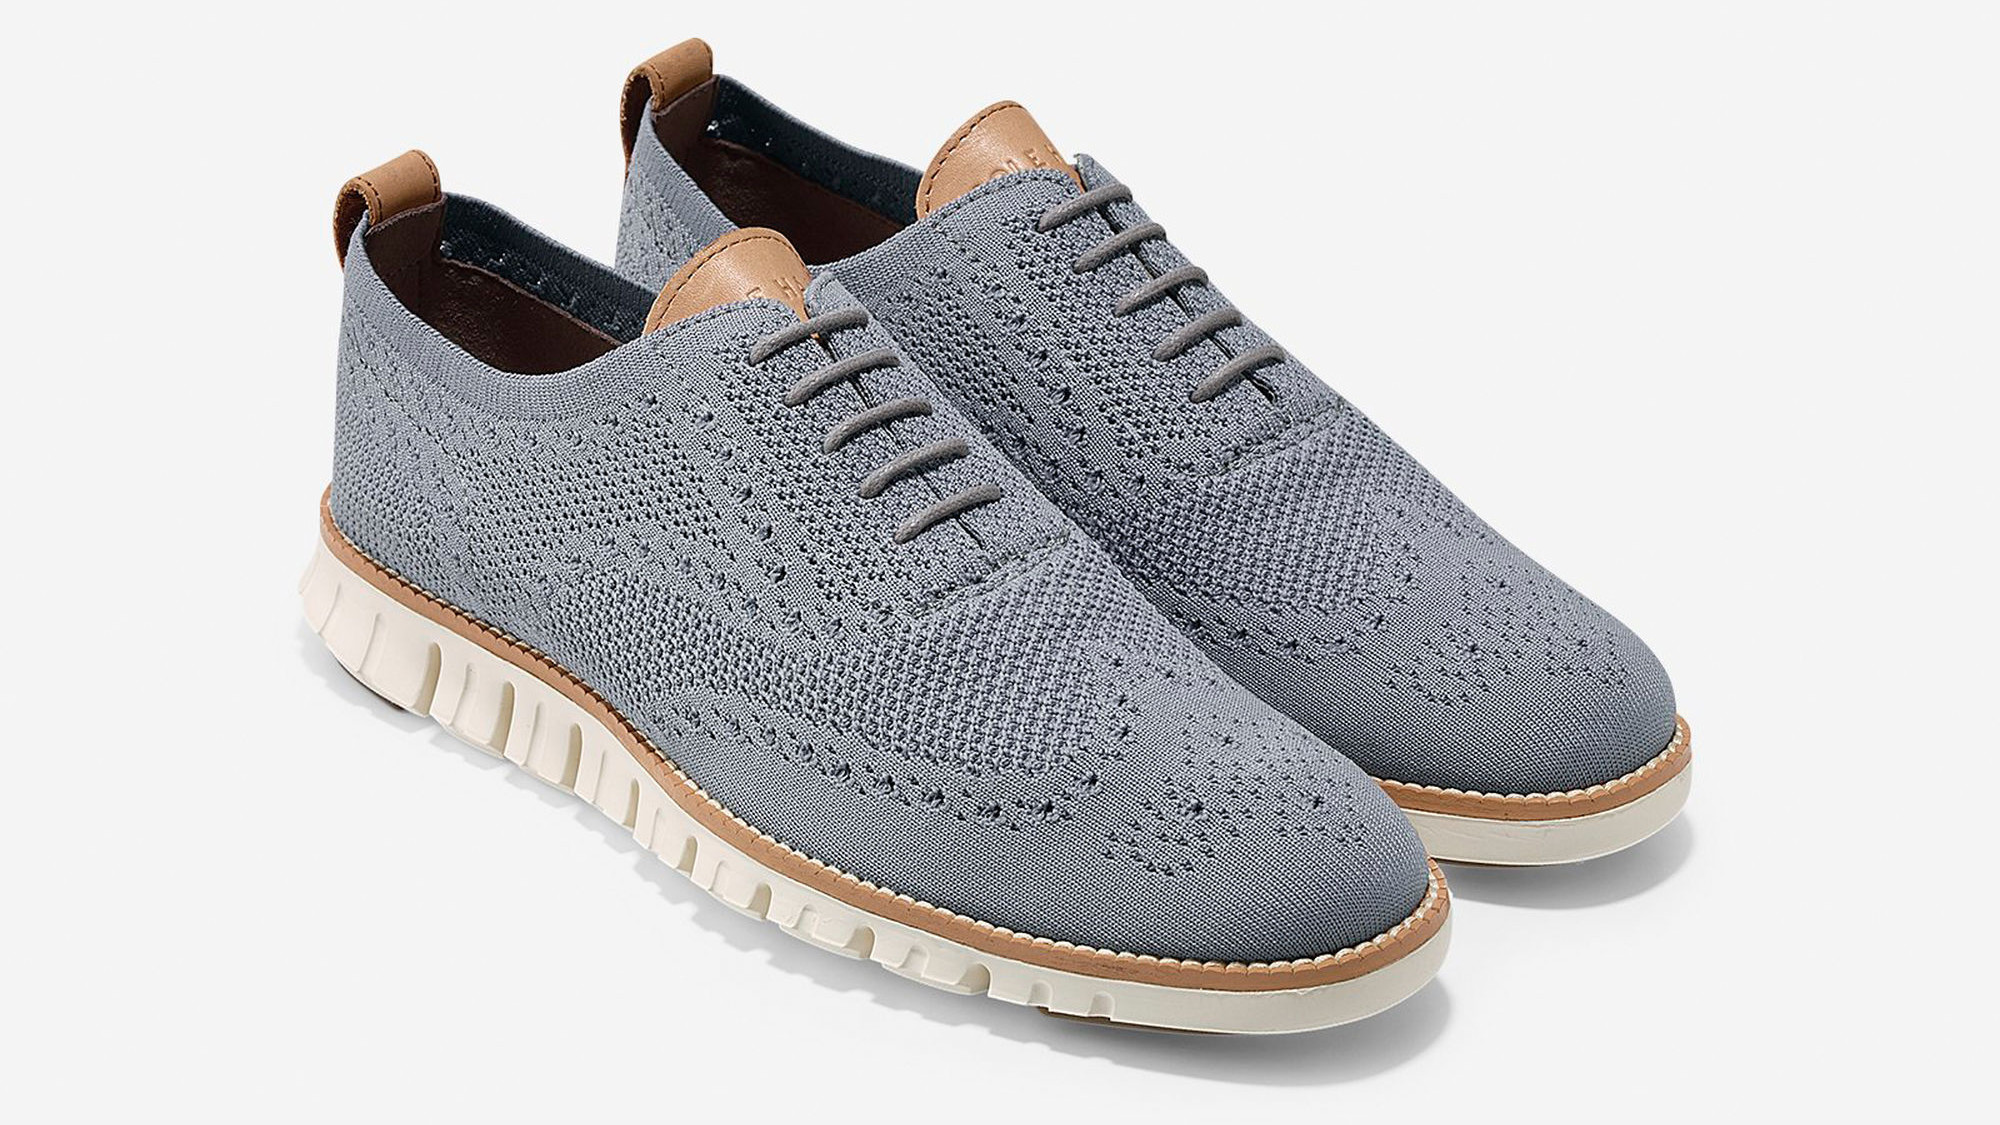 Cole Haan Zerogrand shoes review: Why 